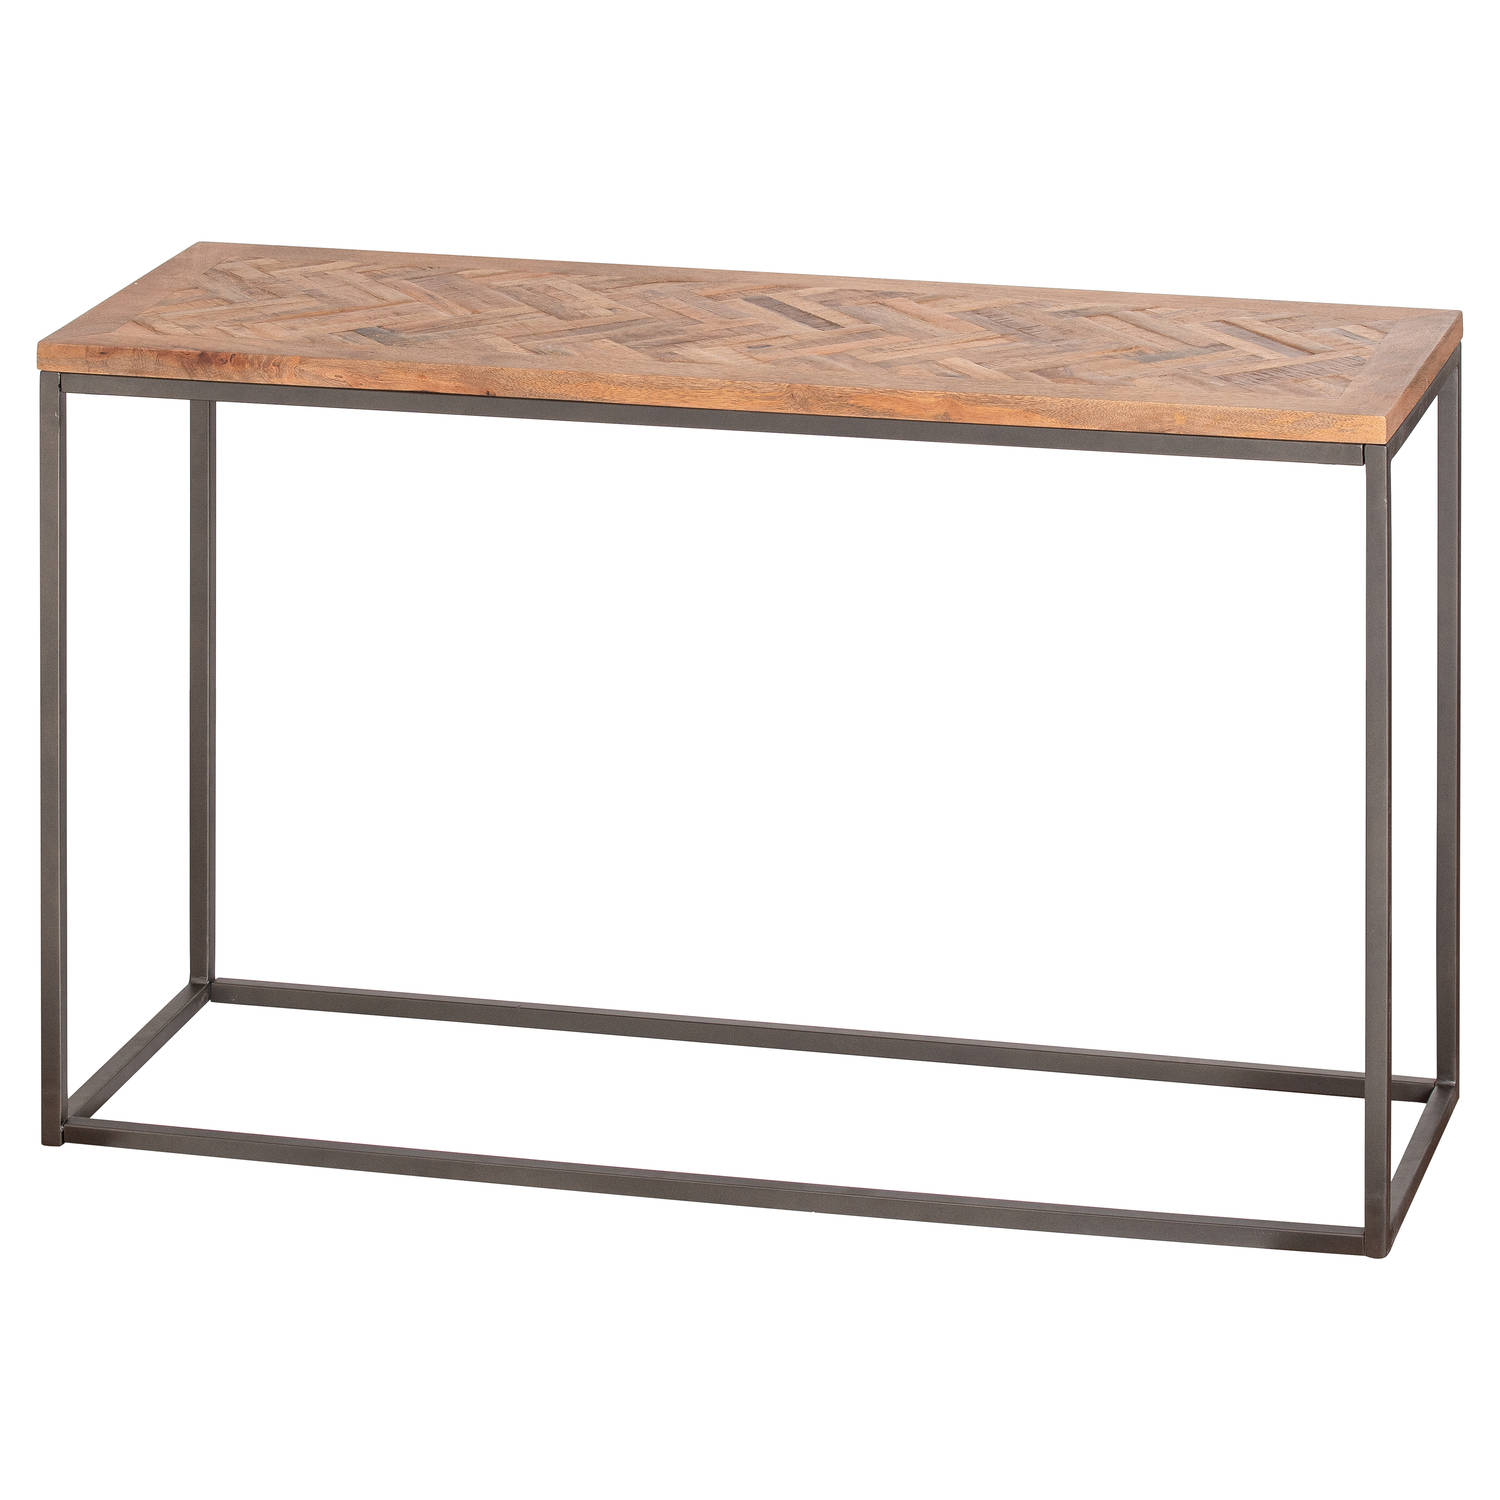 Hoxton Collection Console Table With Parquet Top - Image 1